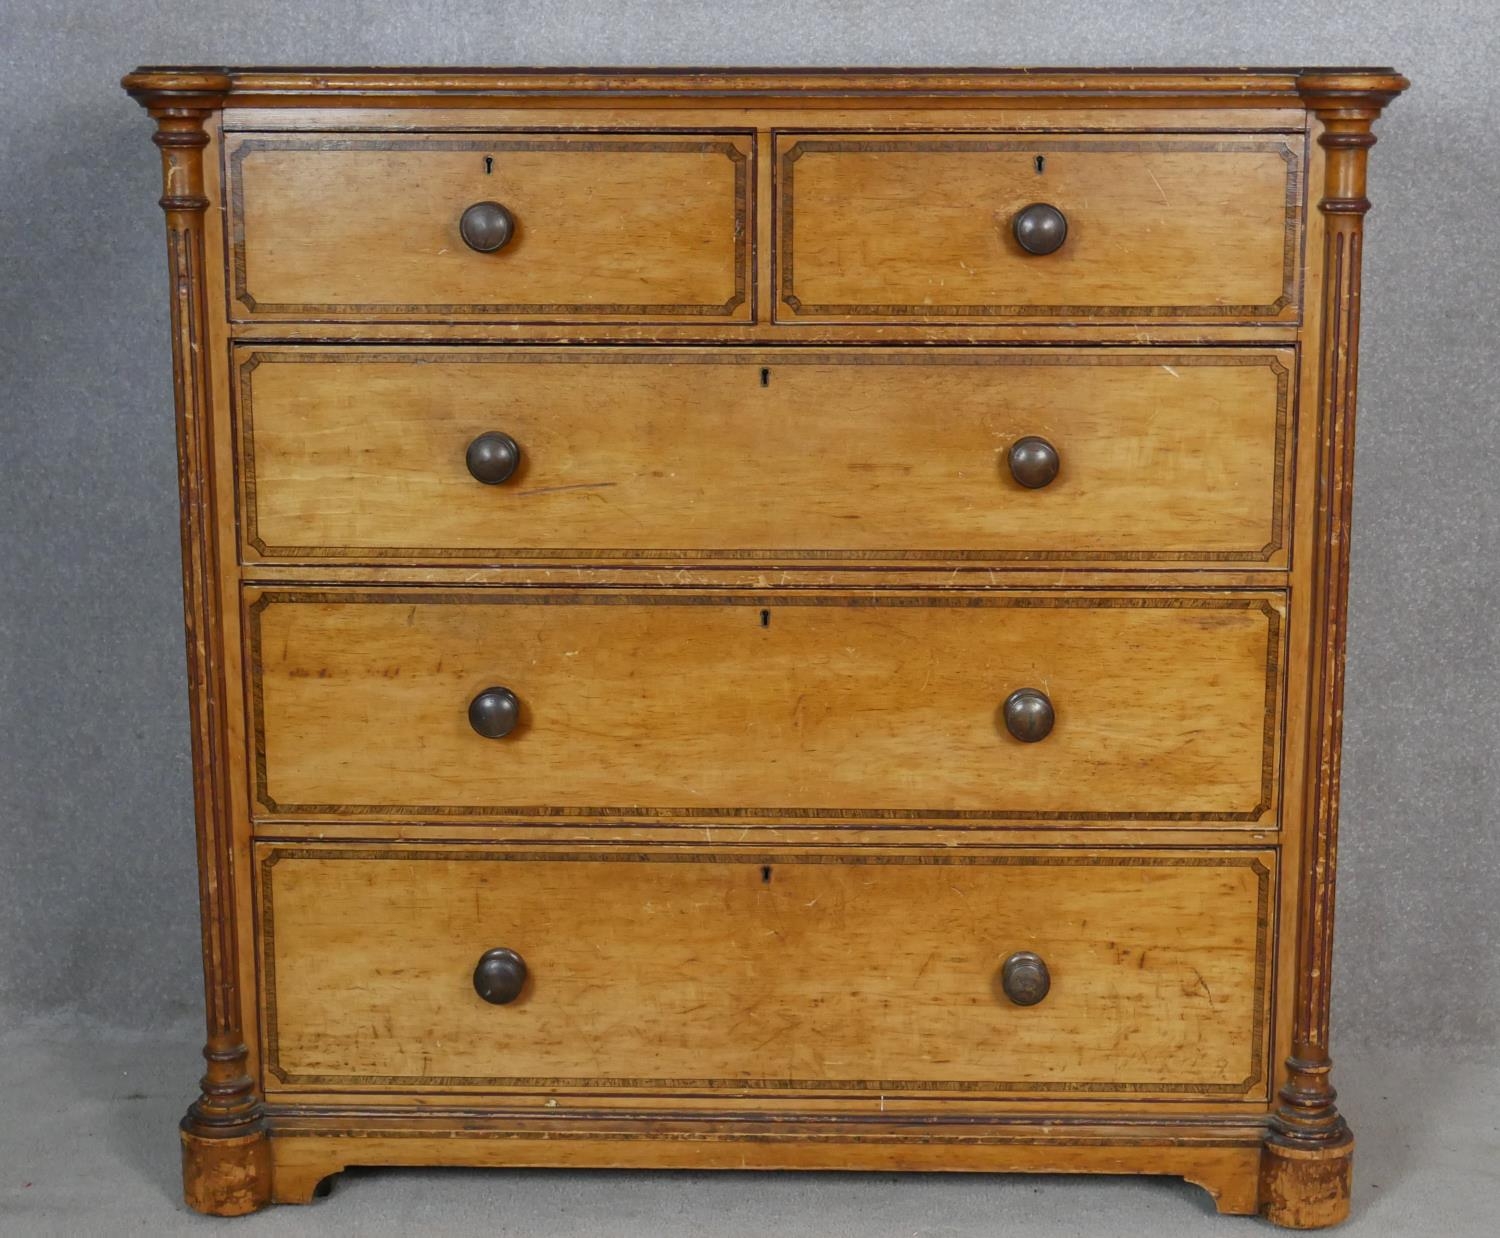 A late Victorian Aesthetic movement pitch pine chest of drawers with painted and ebonised decoration